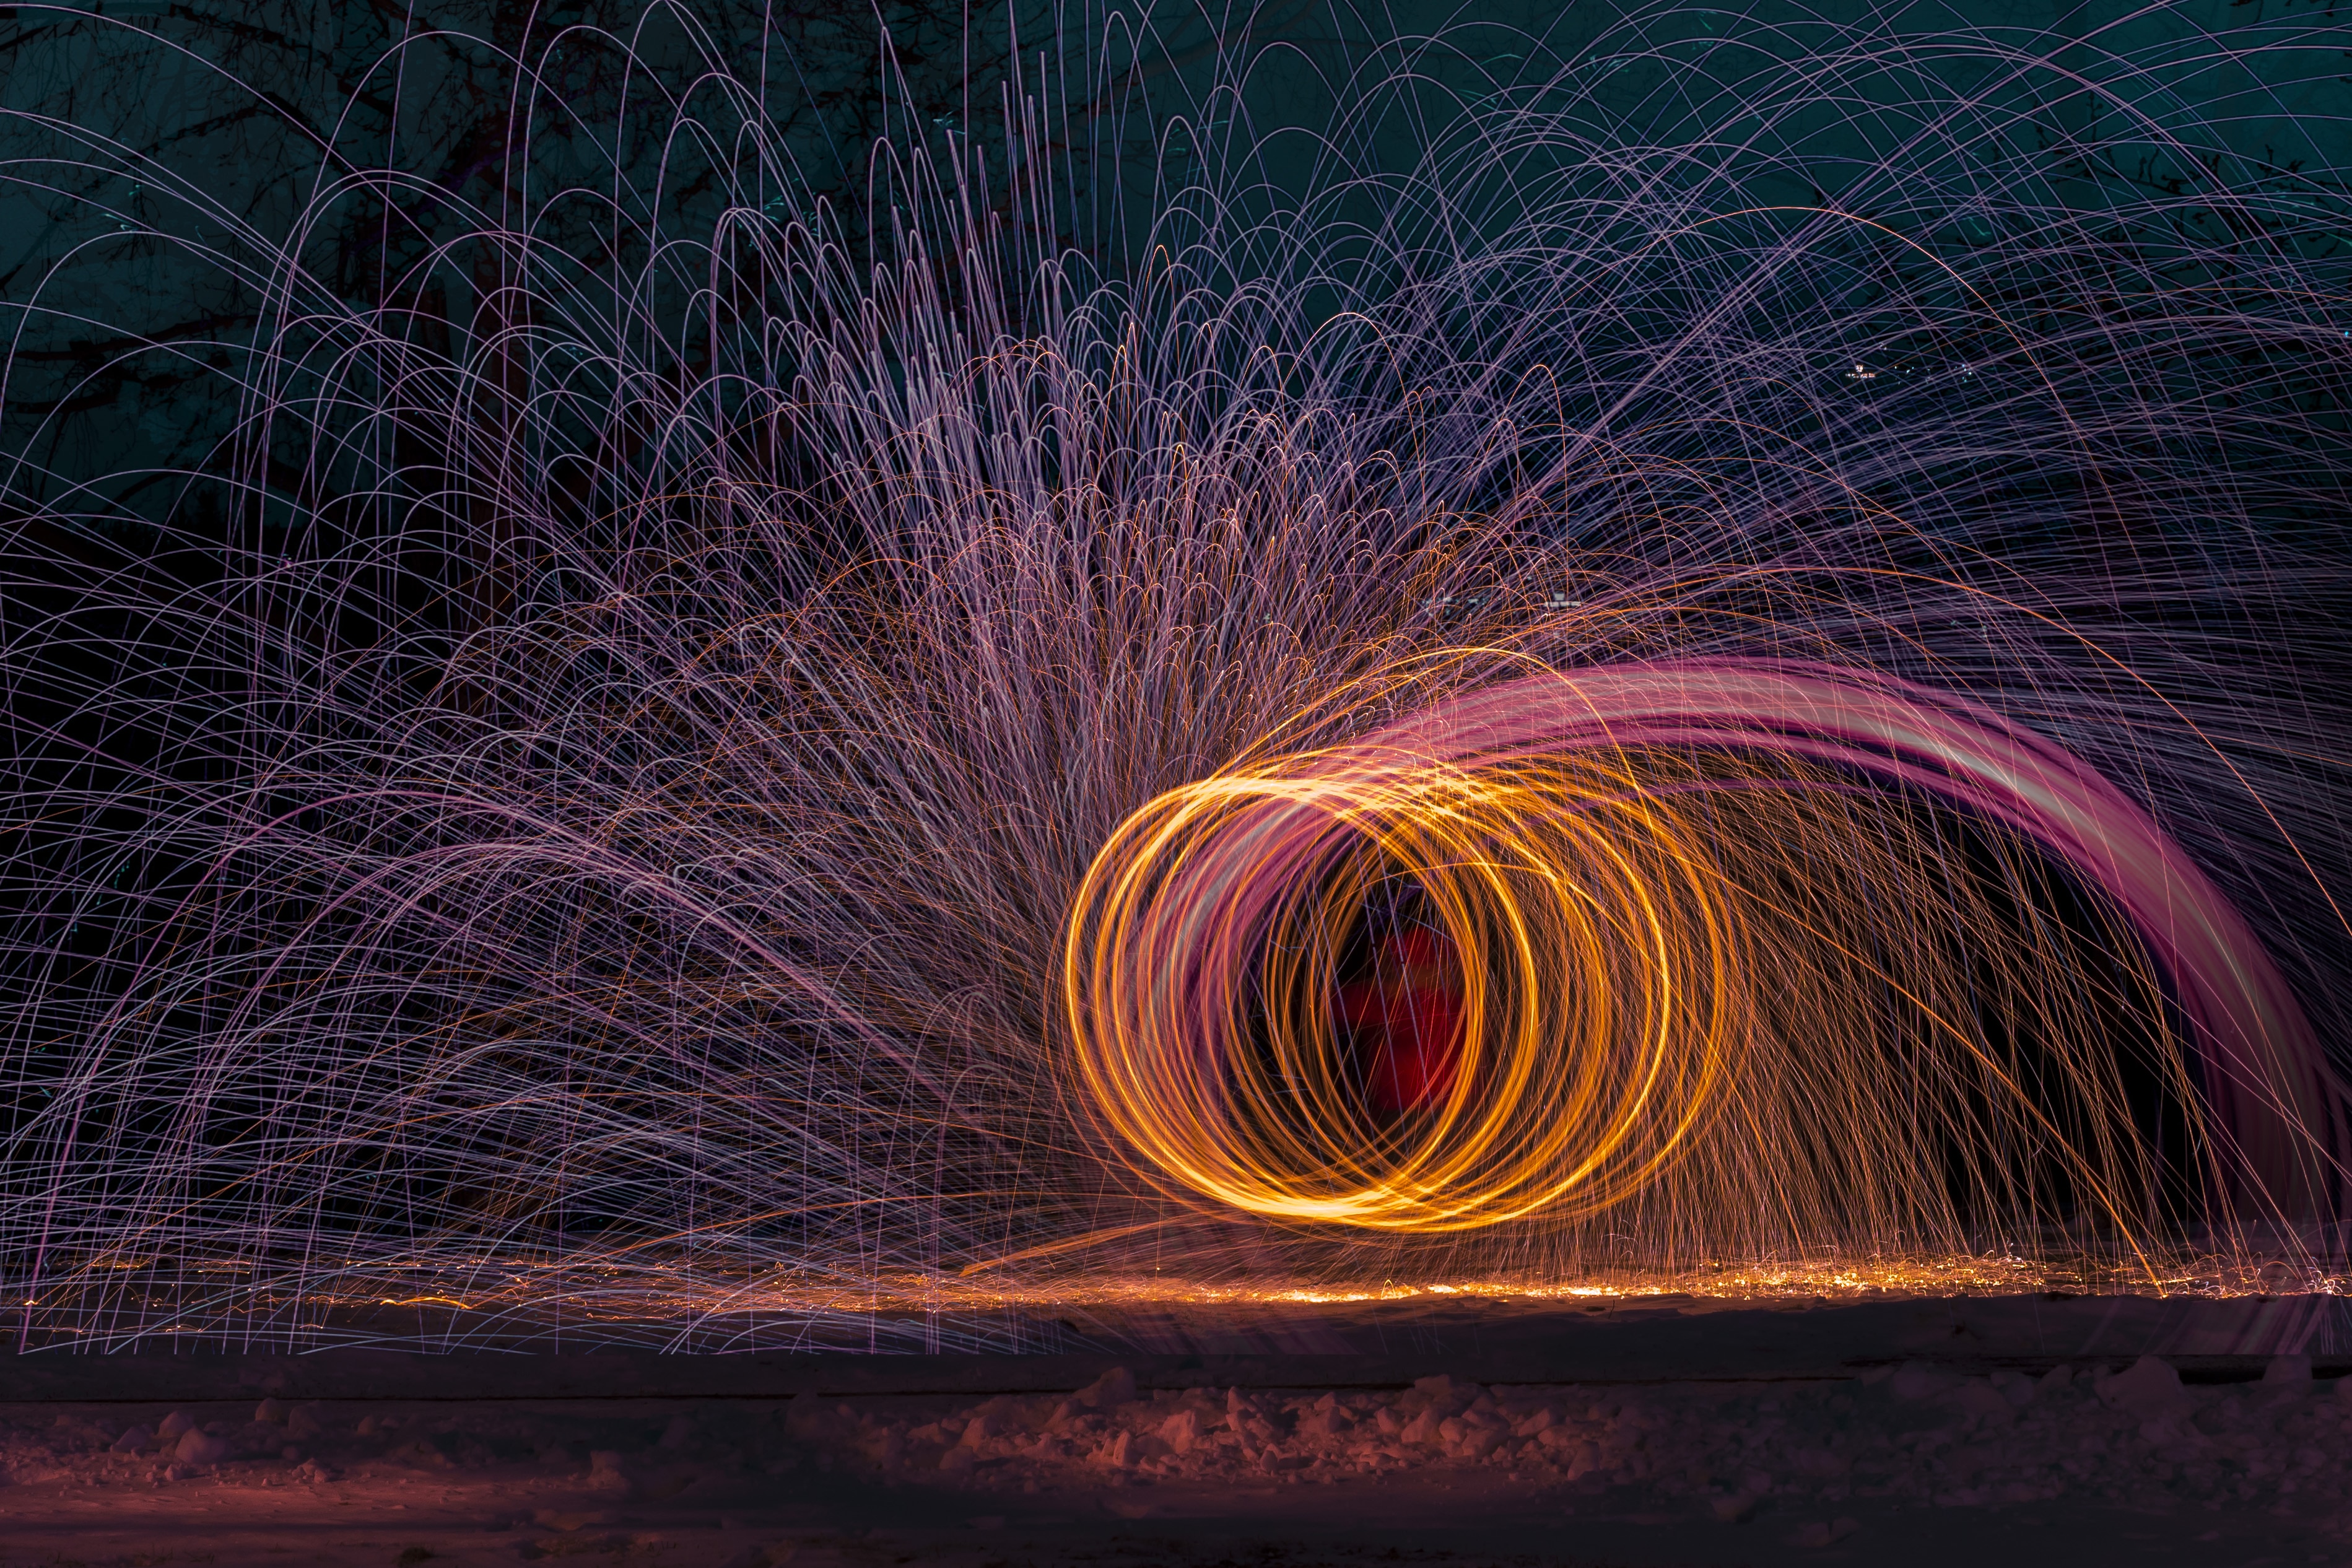 timelapse photo of person fire-dancing